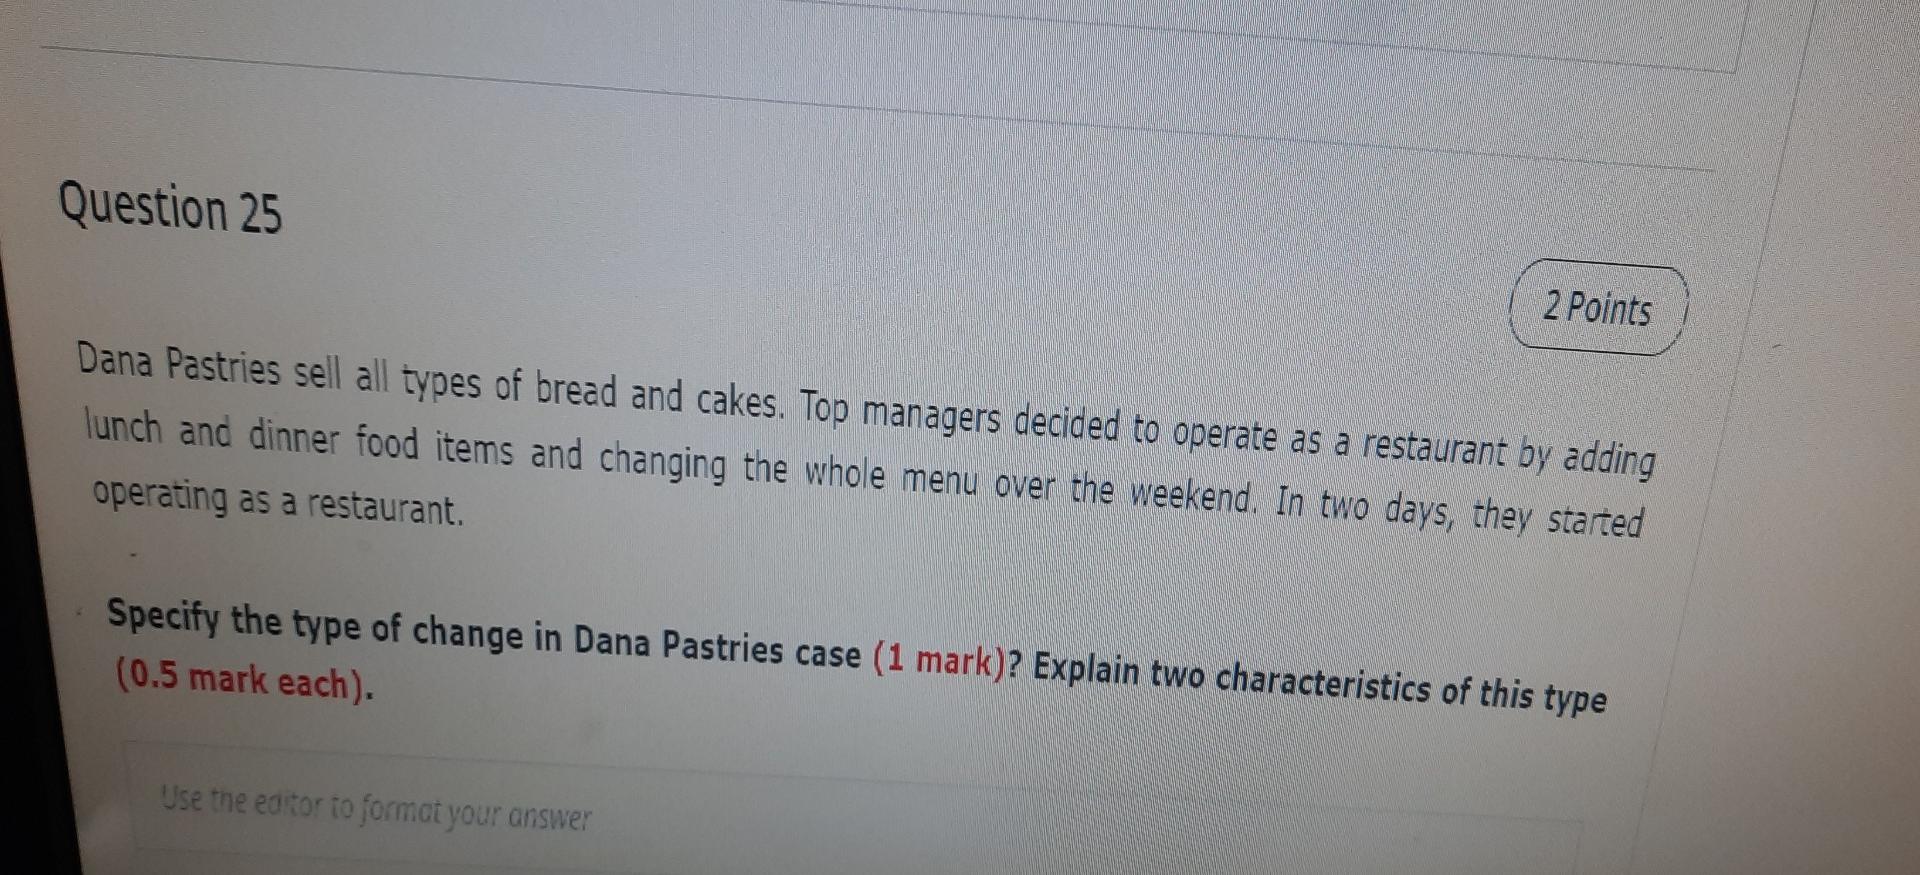 Question 25
2 Points
Dana Pastries sell all types of bread and cakes. Top managers decided to operate as a restaurant by addi